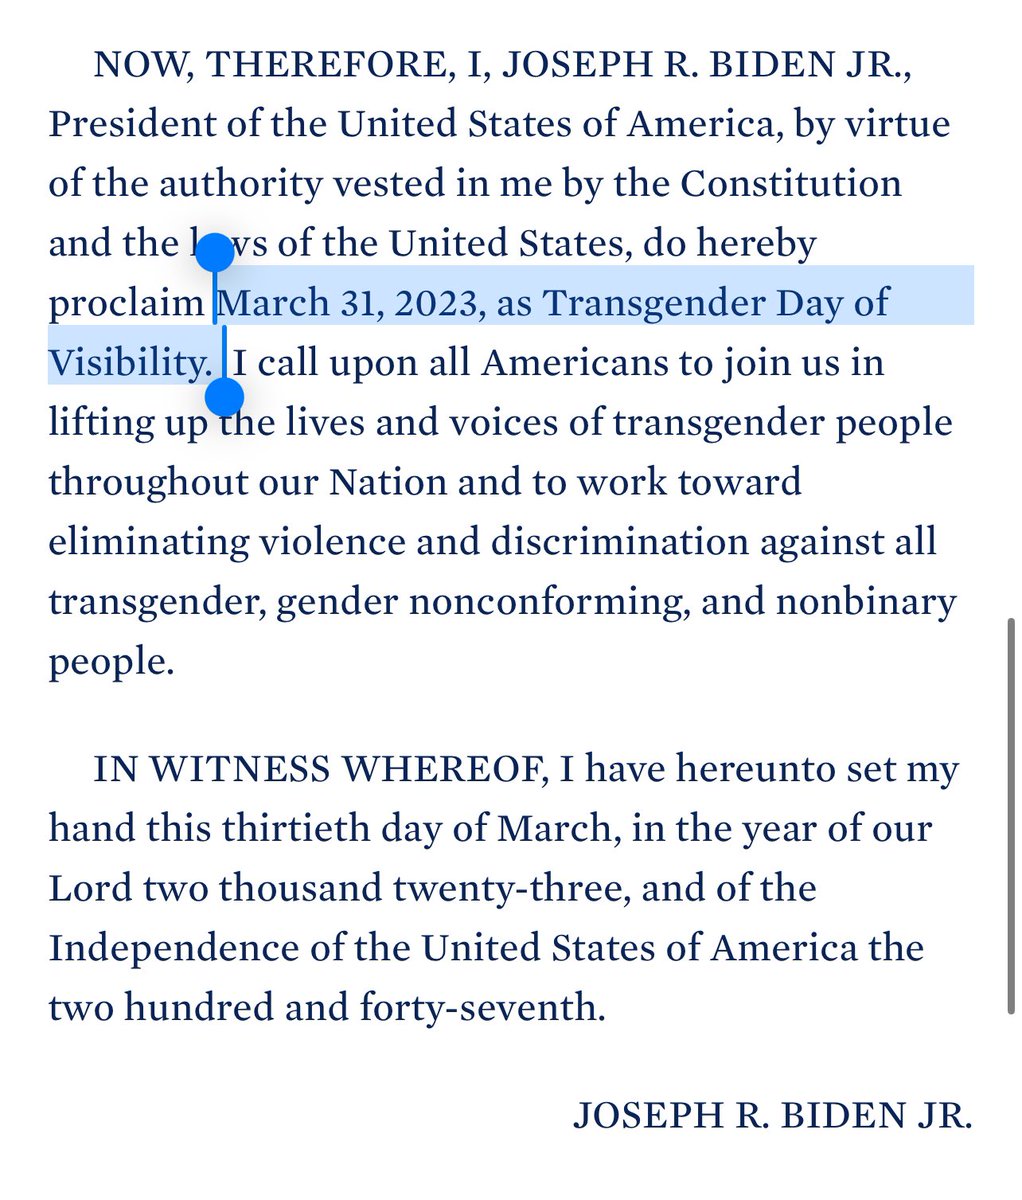 Hey Qrackheads, Transgender Day of Visibility is on March 31st every year. As a matter of fact, Easter was on April 9th last year & Transgender Day of Visibility was STILL observed on, wait for it- March 31st. So kindly have all the fucking seats you hateful, fake outrage losers.